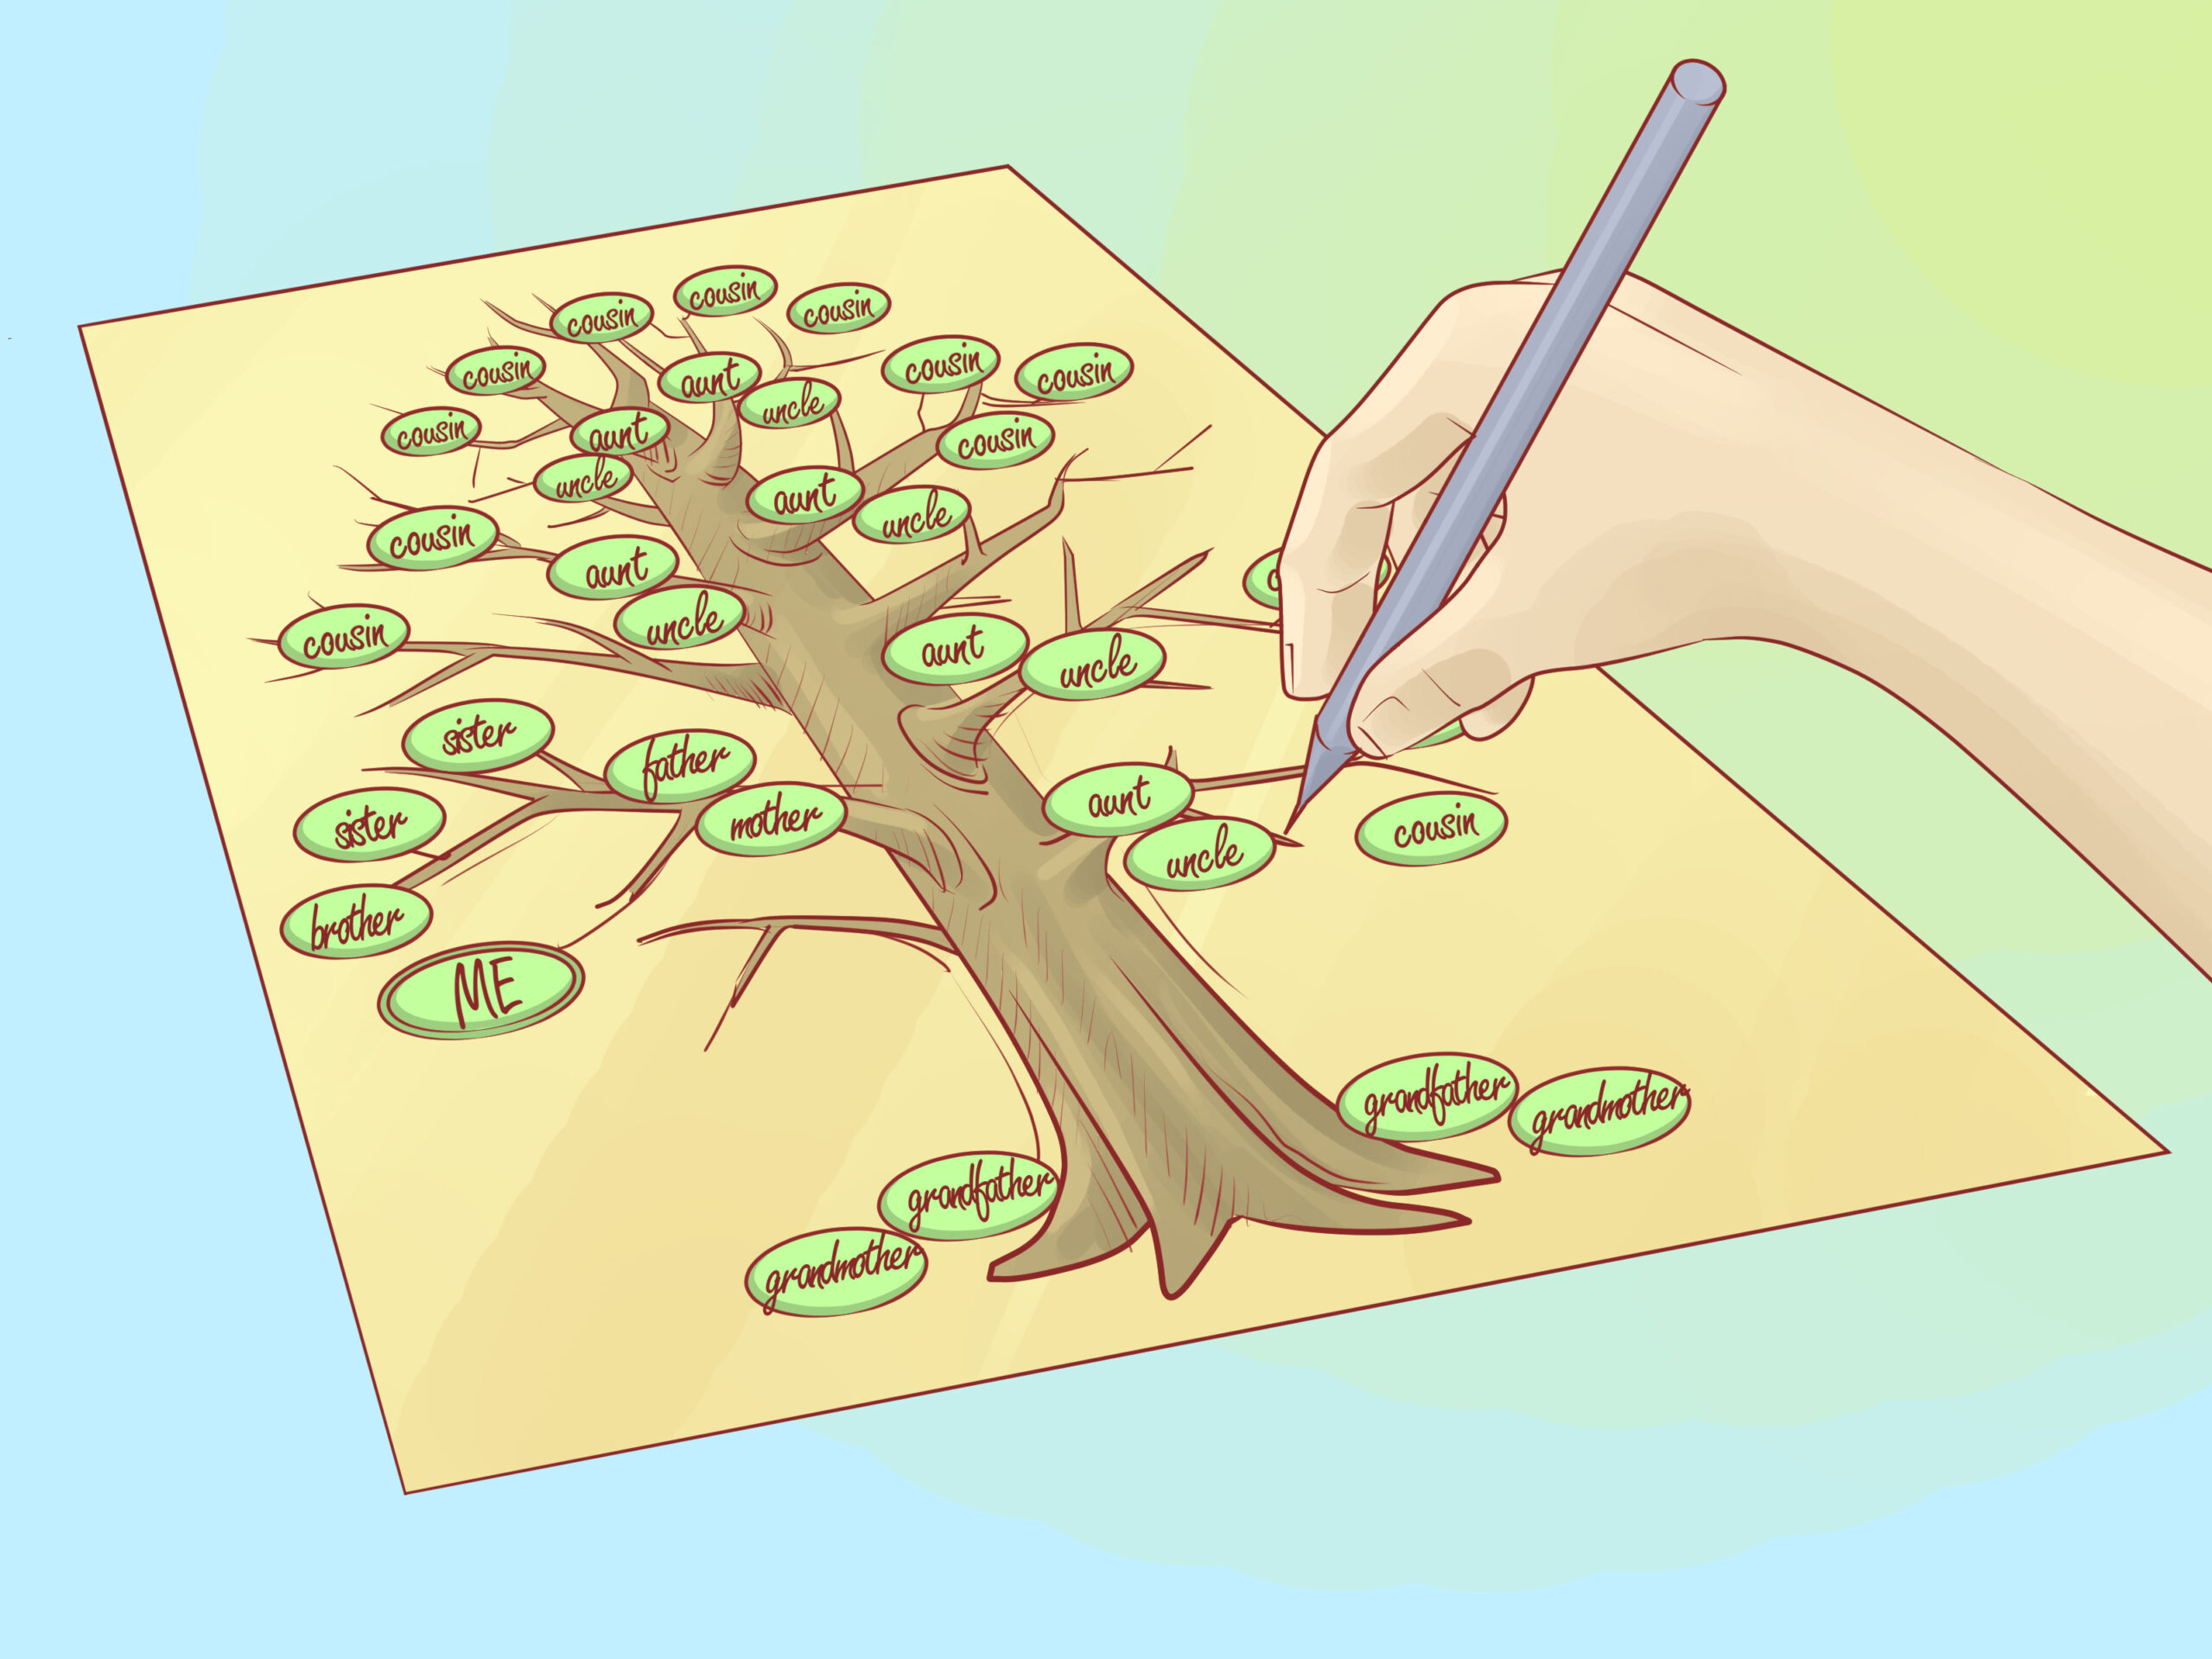 Image of a hand drawing a family tree